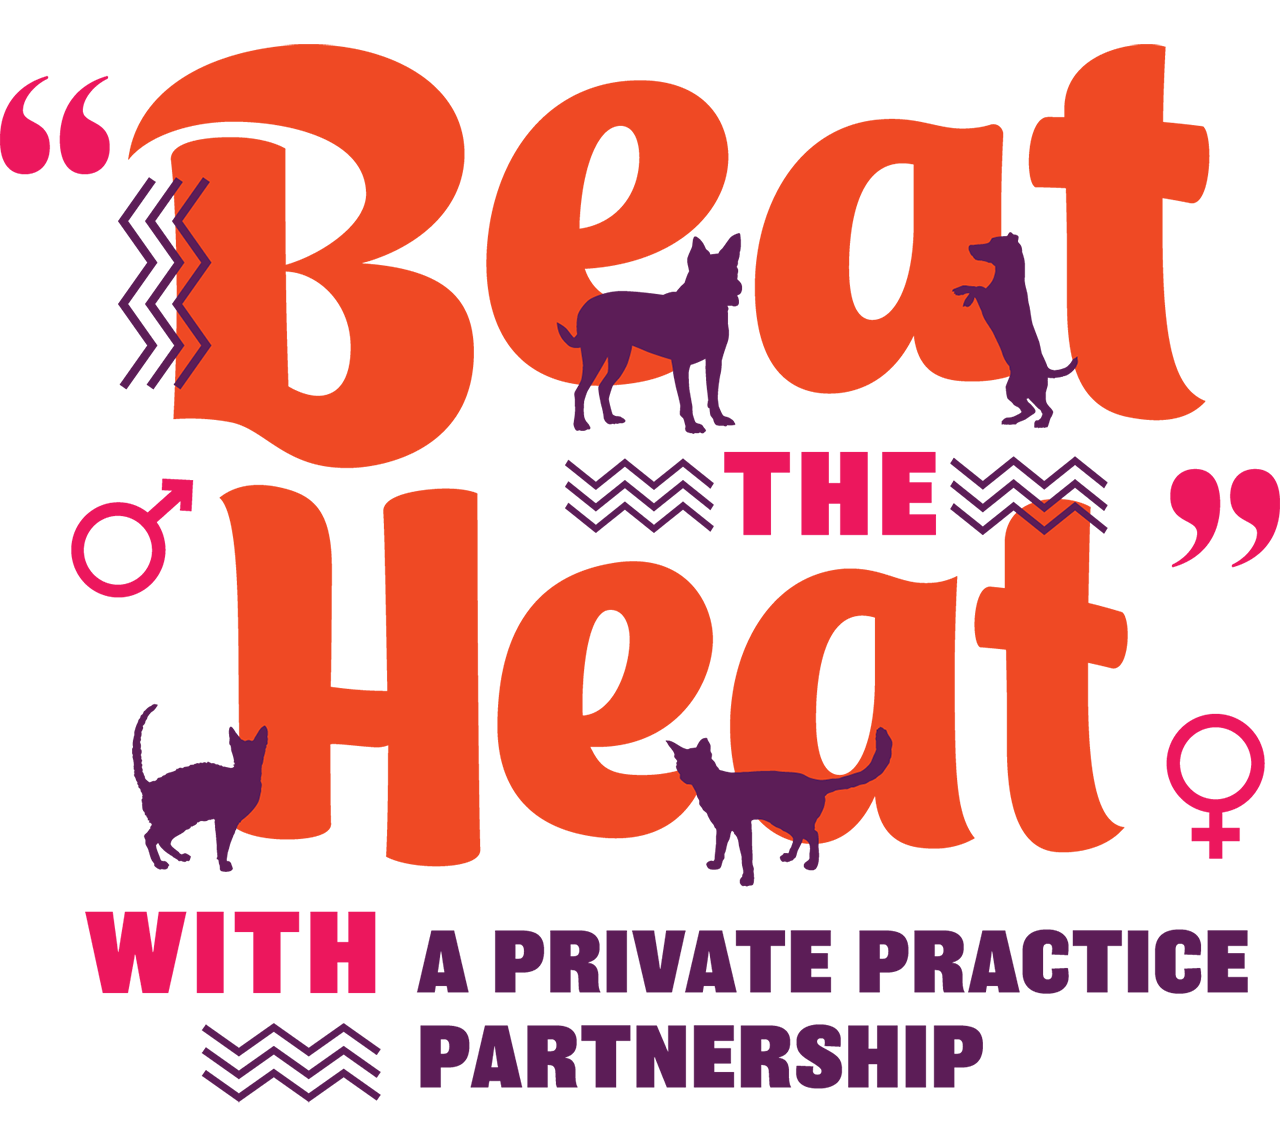 Beat the Heat with A Private Practice Partnership typographic multi-colored (orange, pink, and purple) title